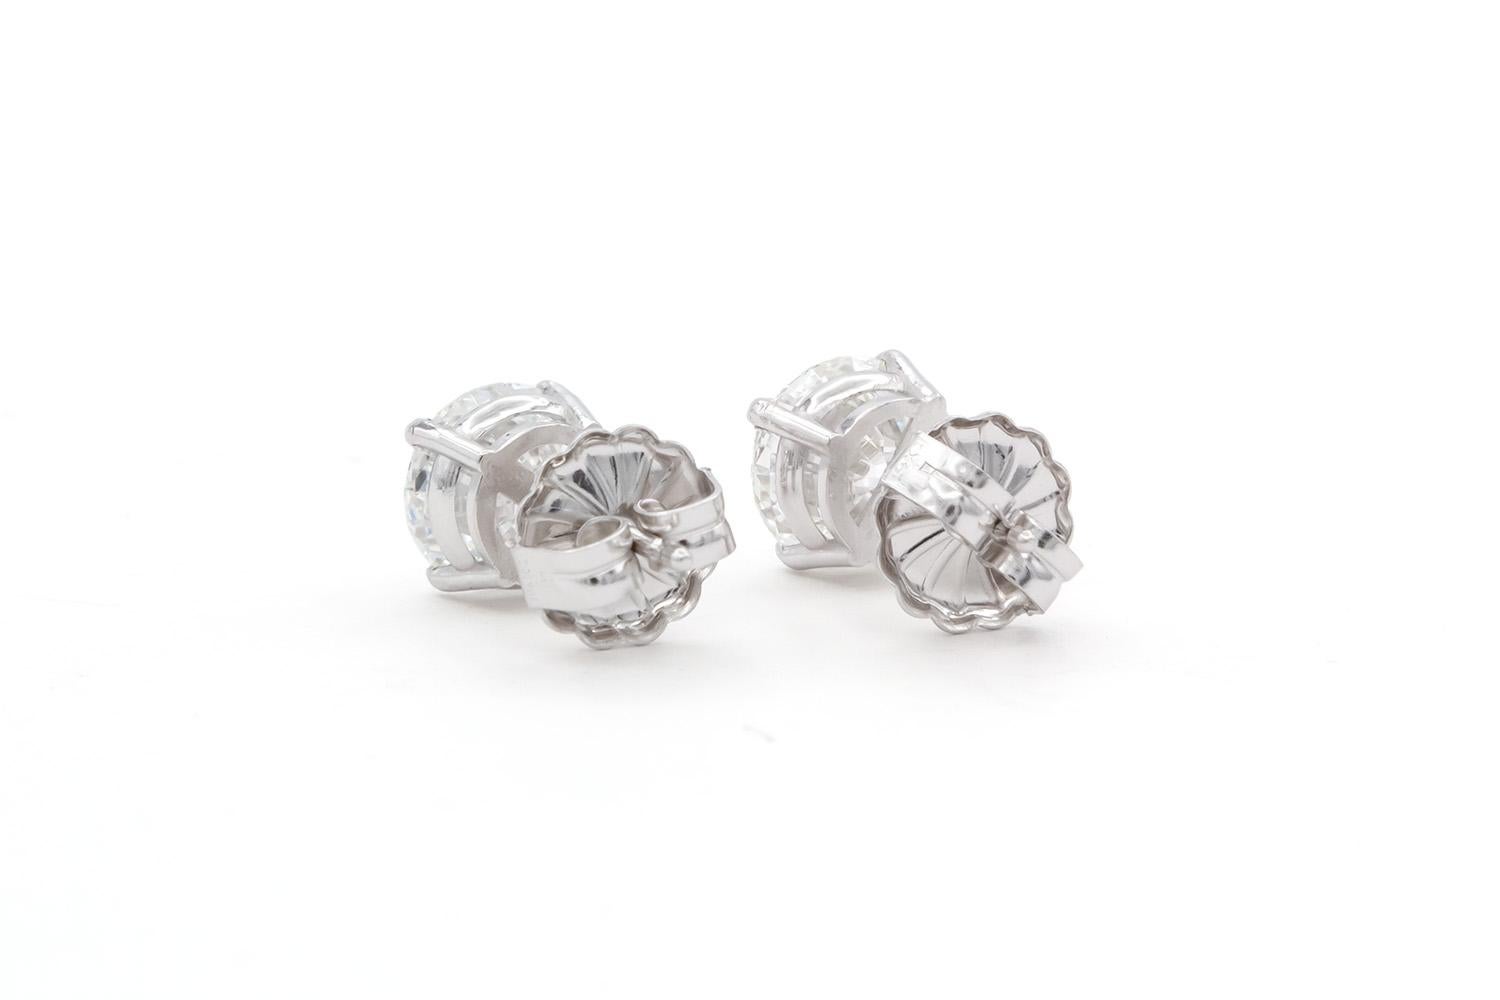 GIA Certified 14k White Gold & Round Brilliant Cut Diamond Stud Earrings 2.29ctw In Excellent Condition For Sale In Tustin, CA